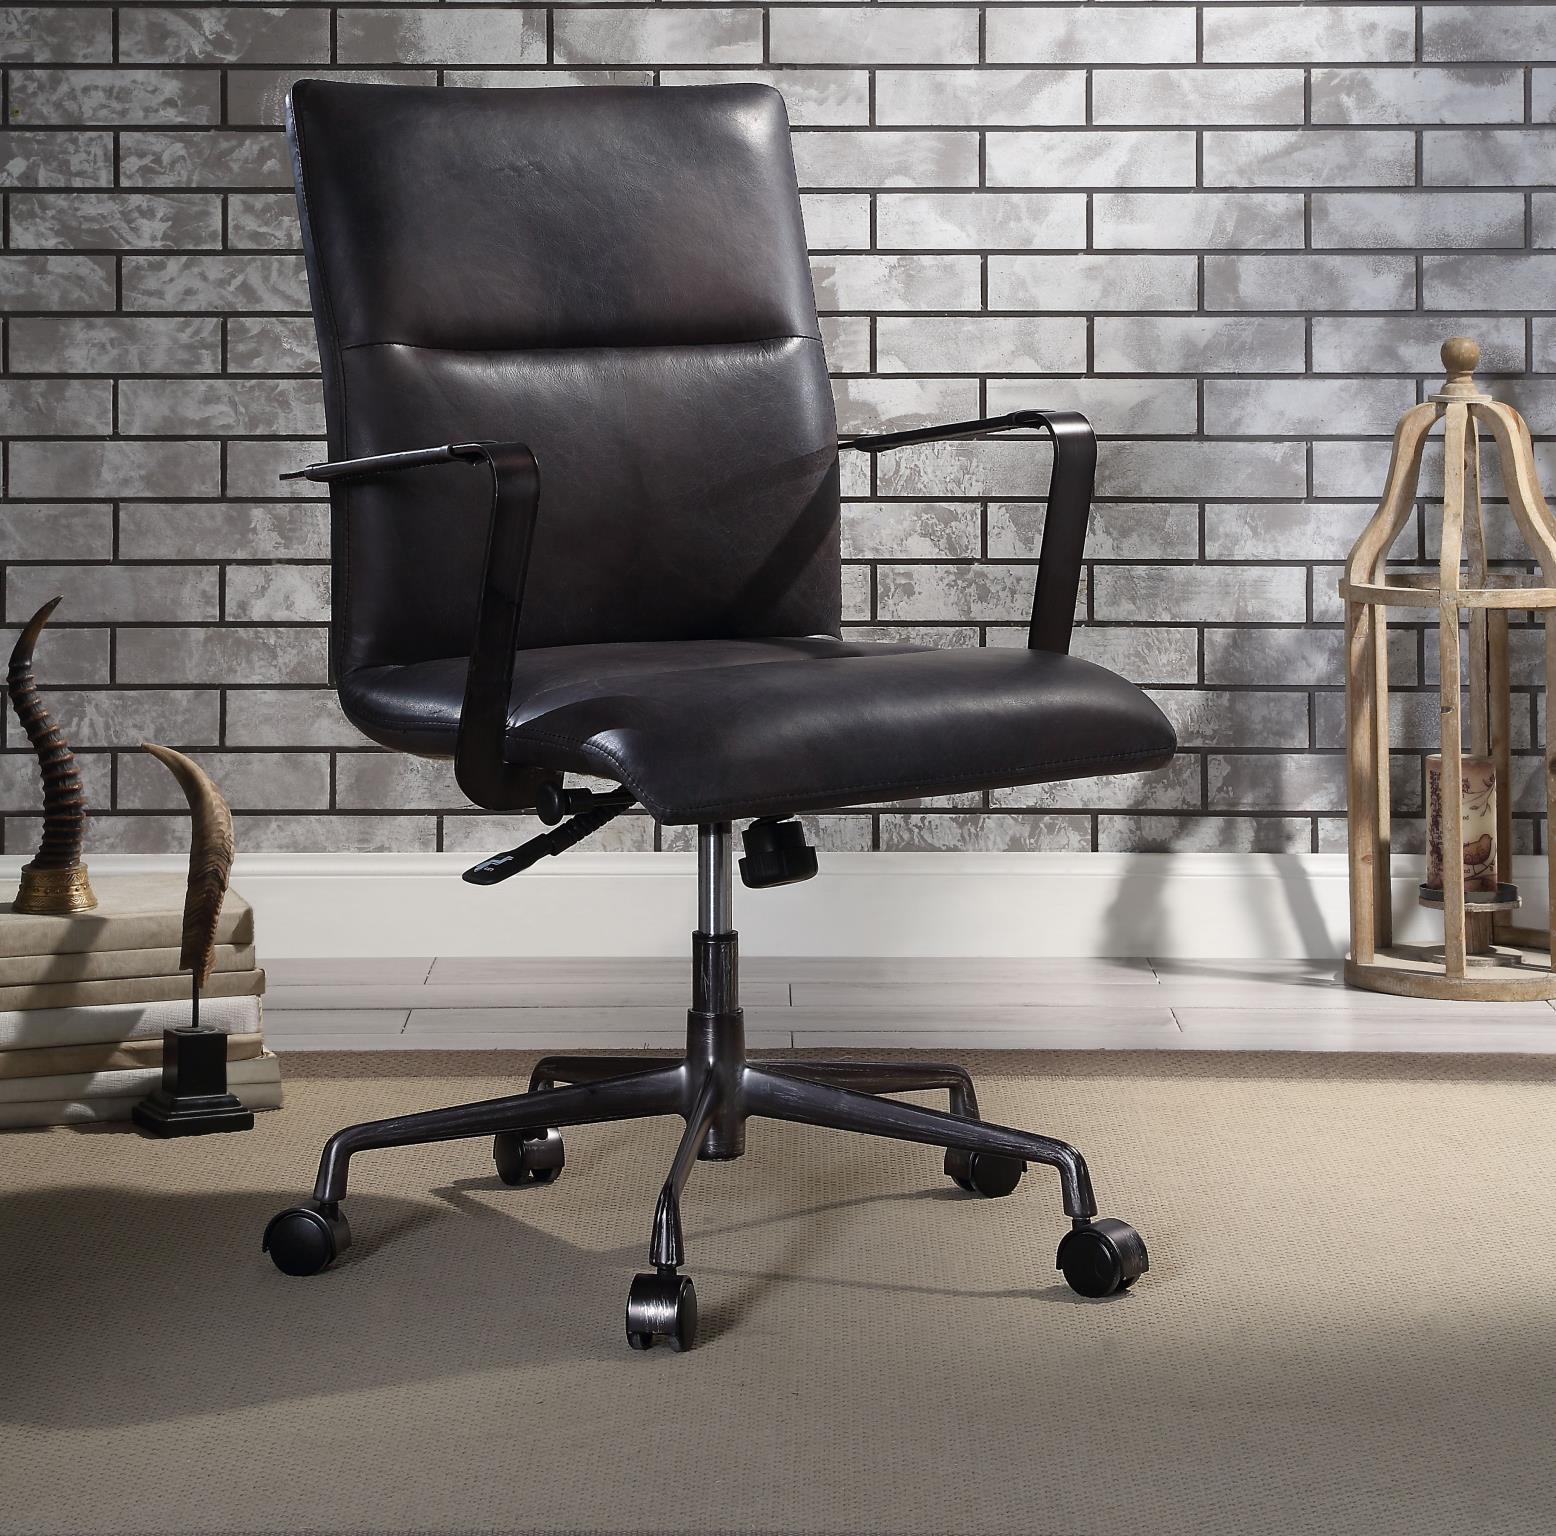 Contemporary, Transitional Executive Chair Indra Indra 92569 in Onyx, Black Genuine Leather